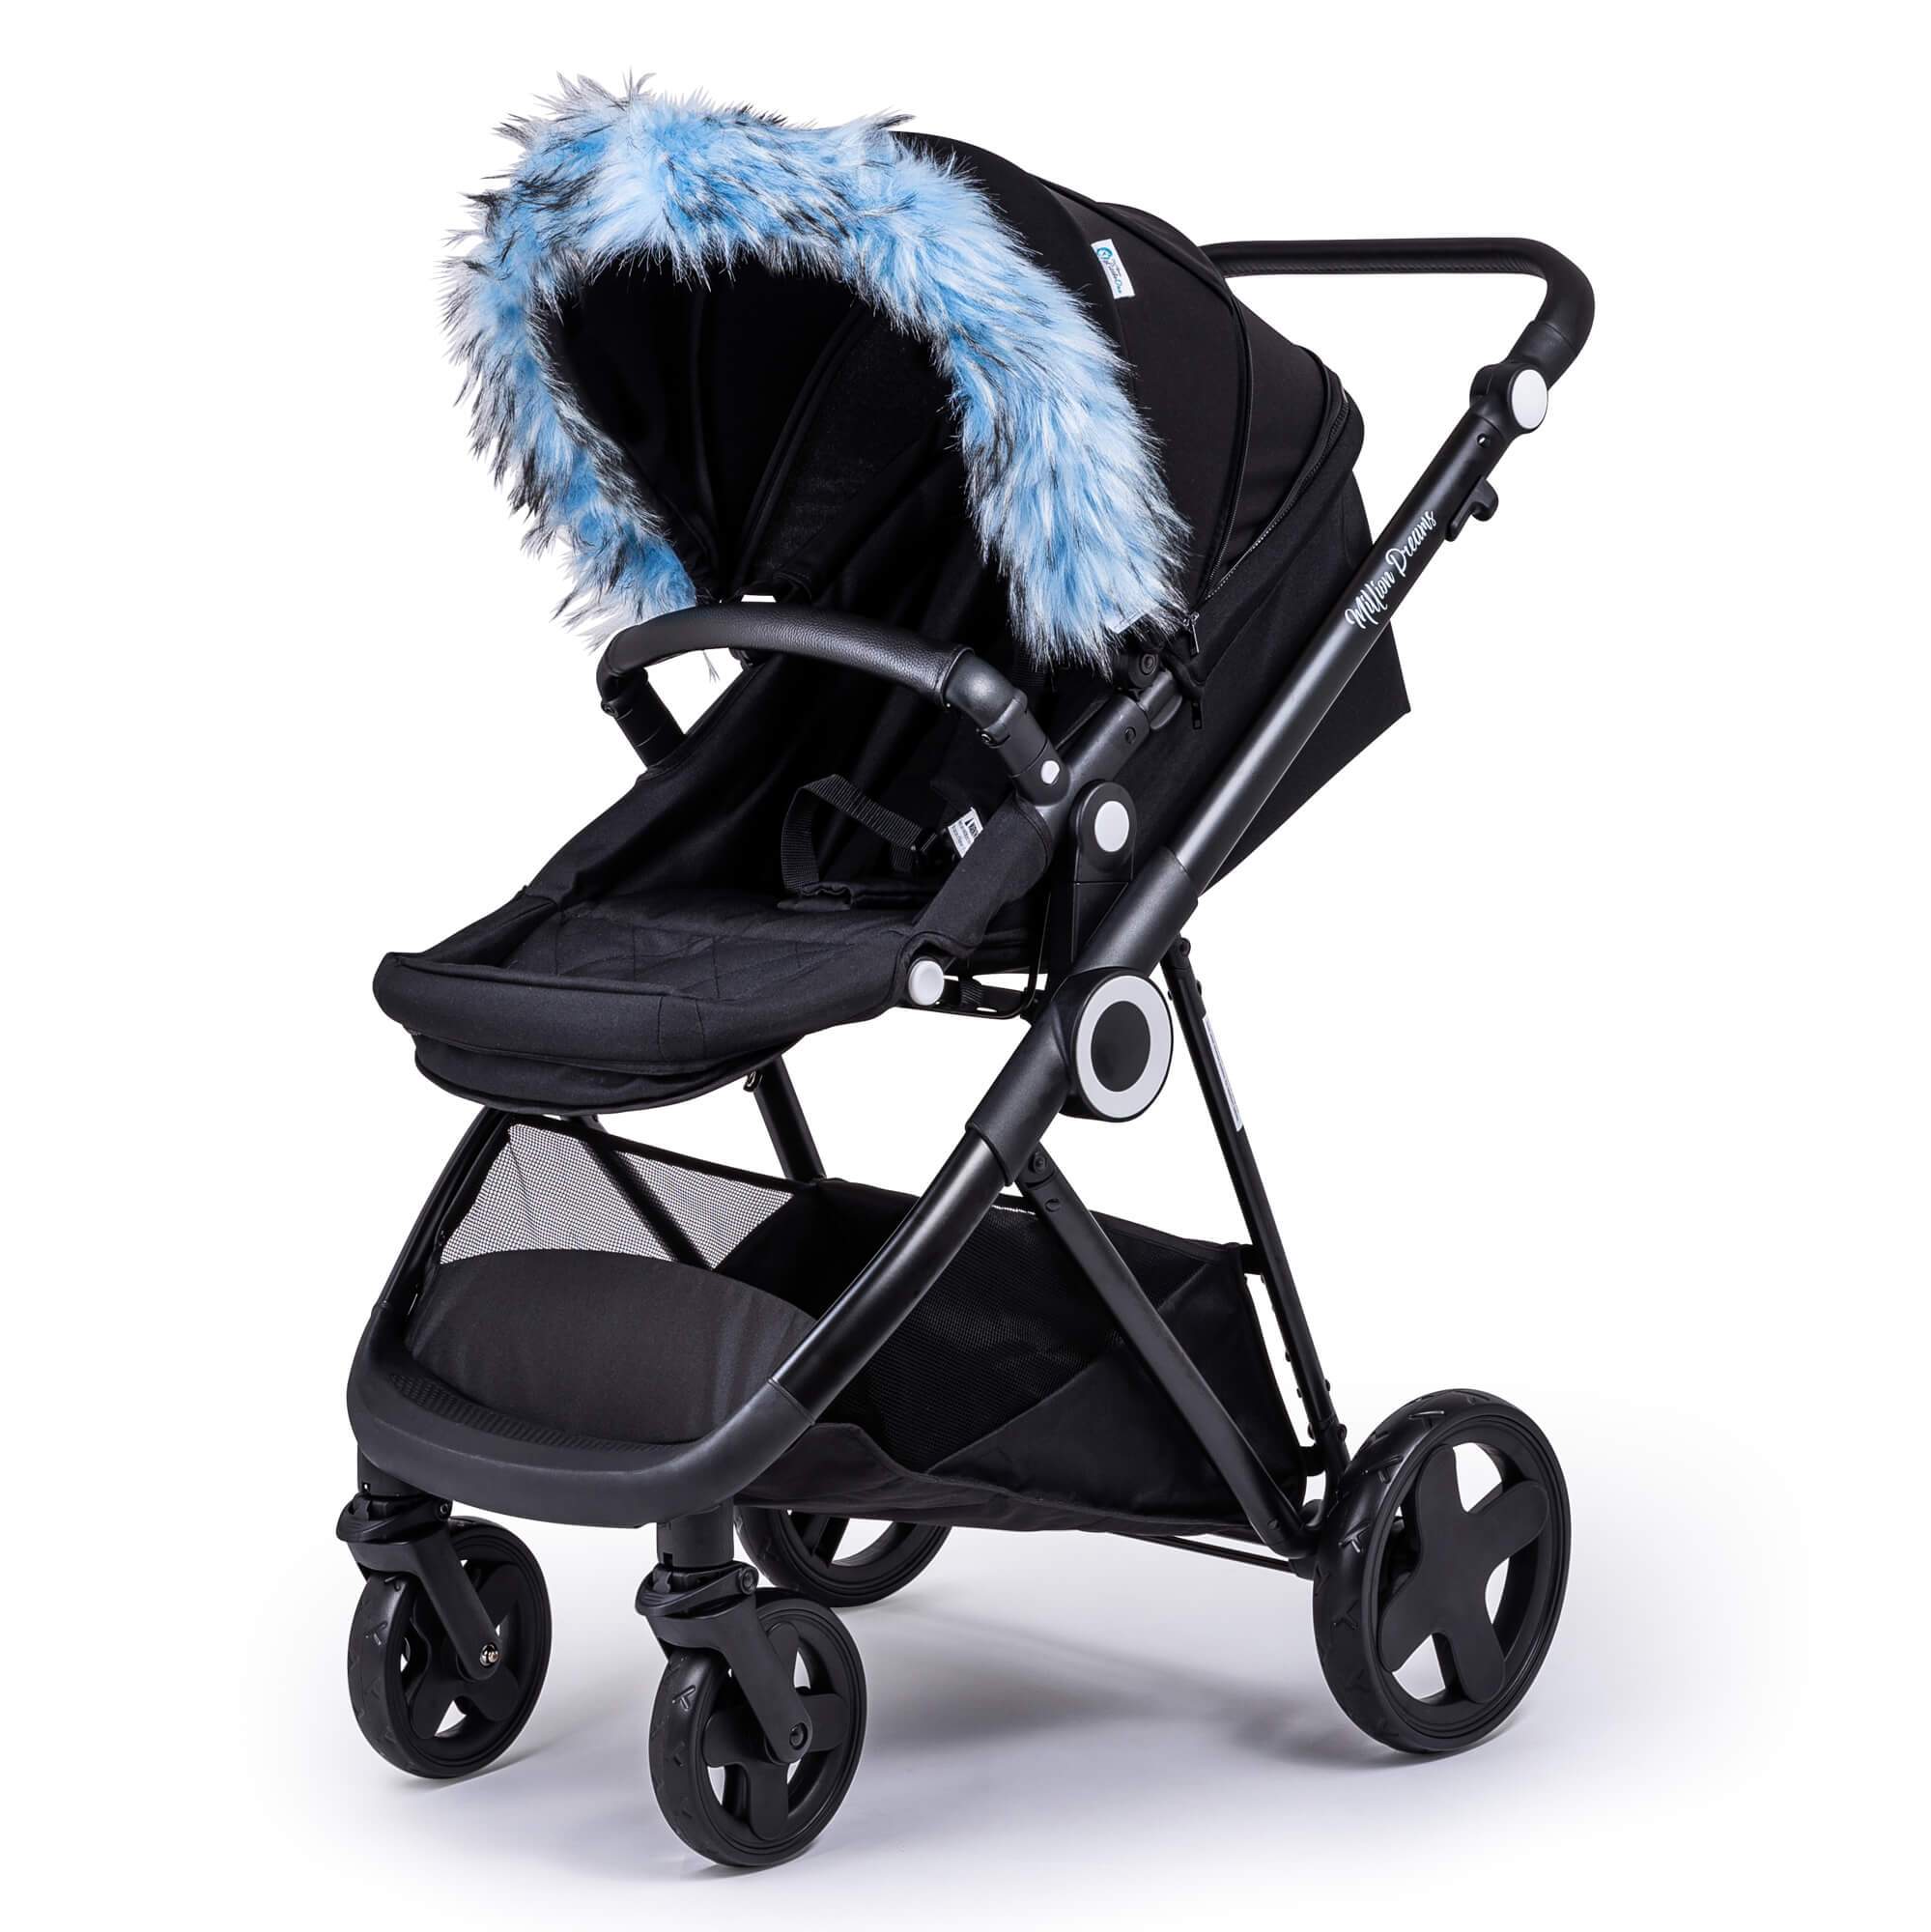 Pram Fur Hood Trim Attachment for Pushchair Compatible with Bloom - Light Blue / Fits All Models | For Your Little One